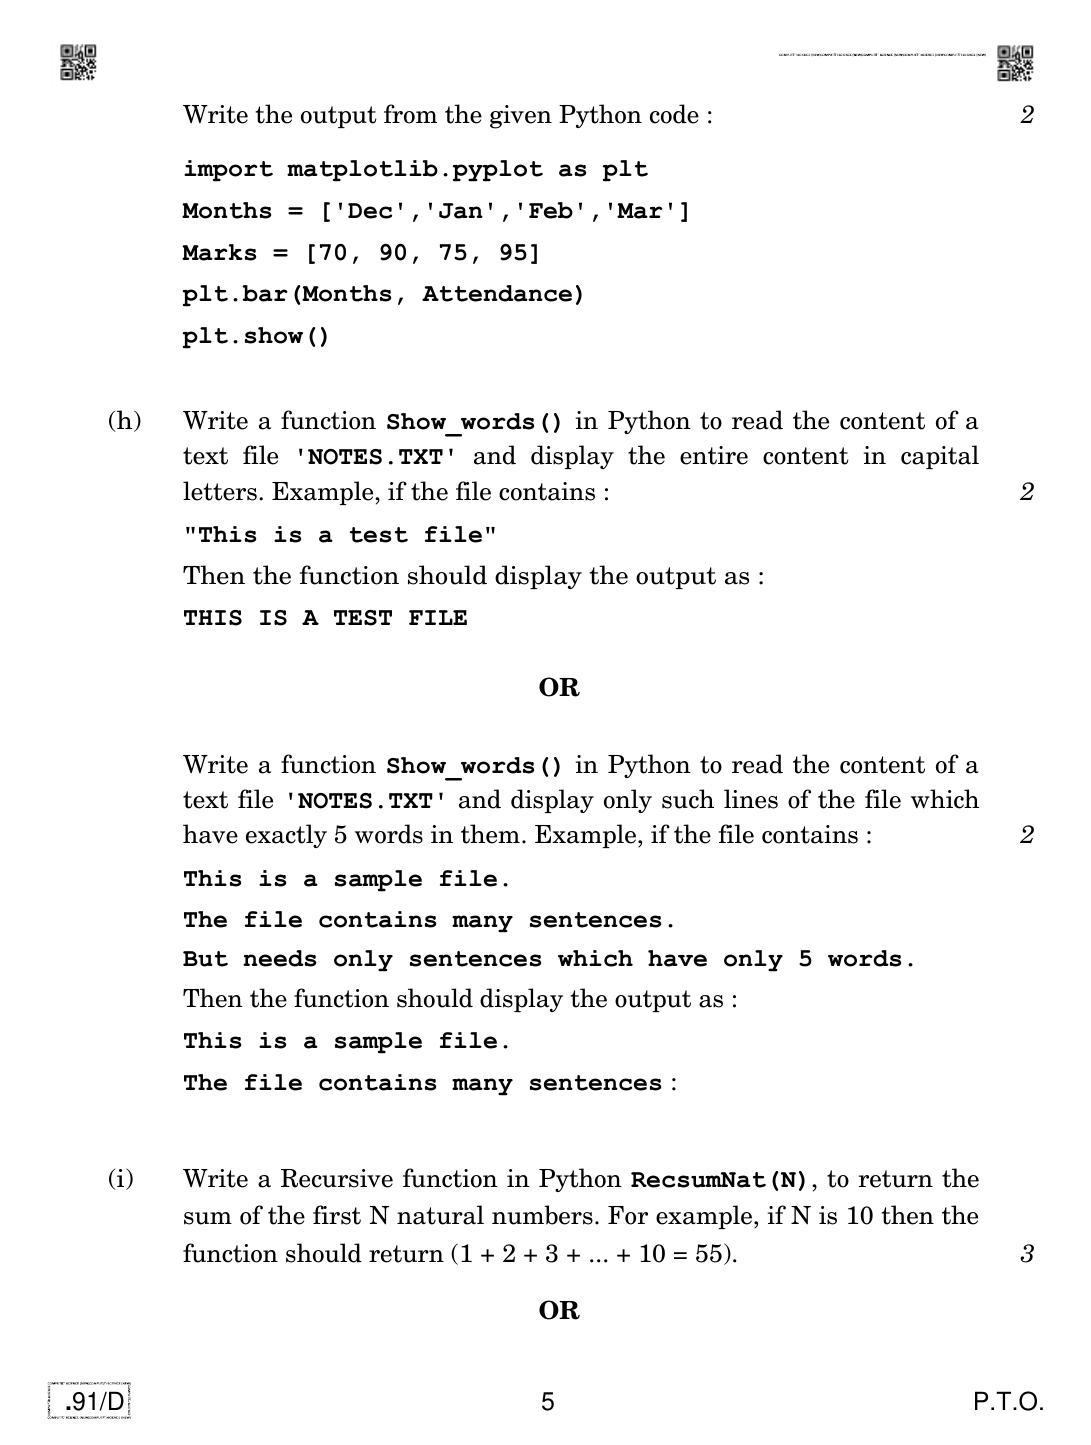 CBSE Class 12 CS 2020 Compartment Question Paper - Page 5